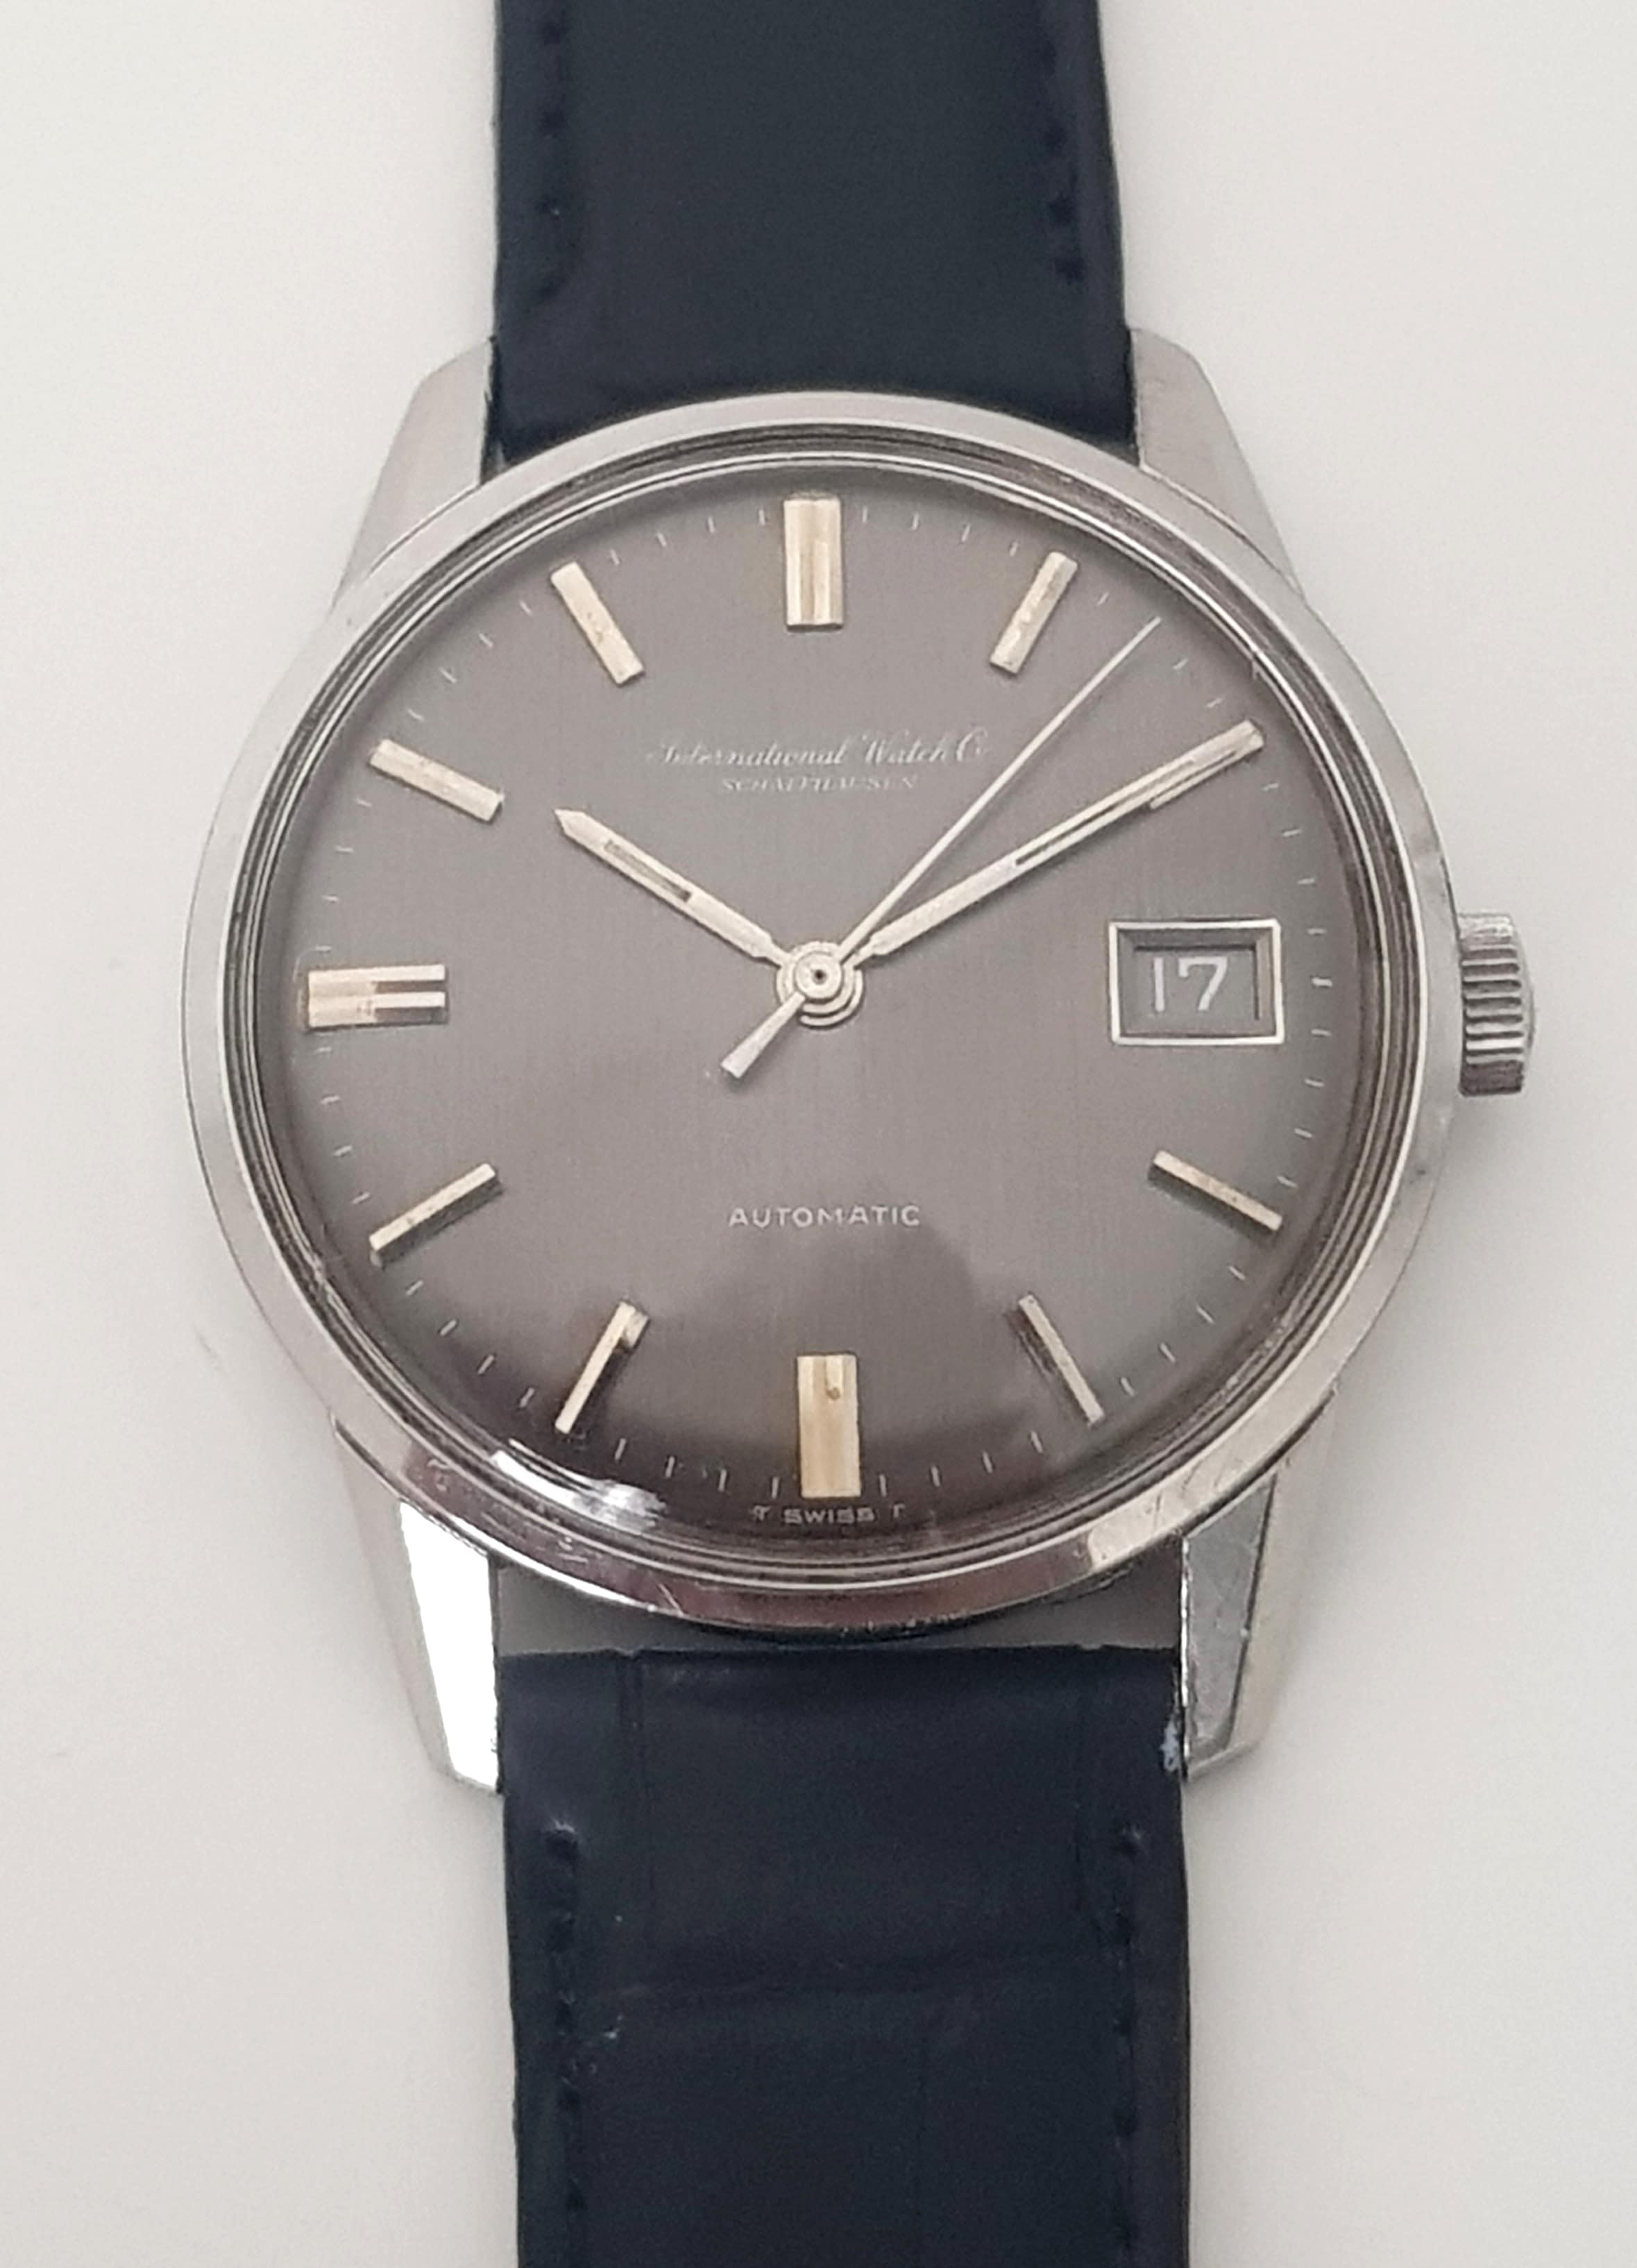 Amazing IWC Automatic Watch with grey linen dial Vintage – Vintage ...